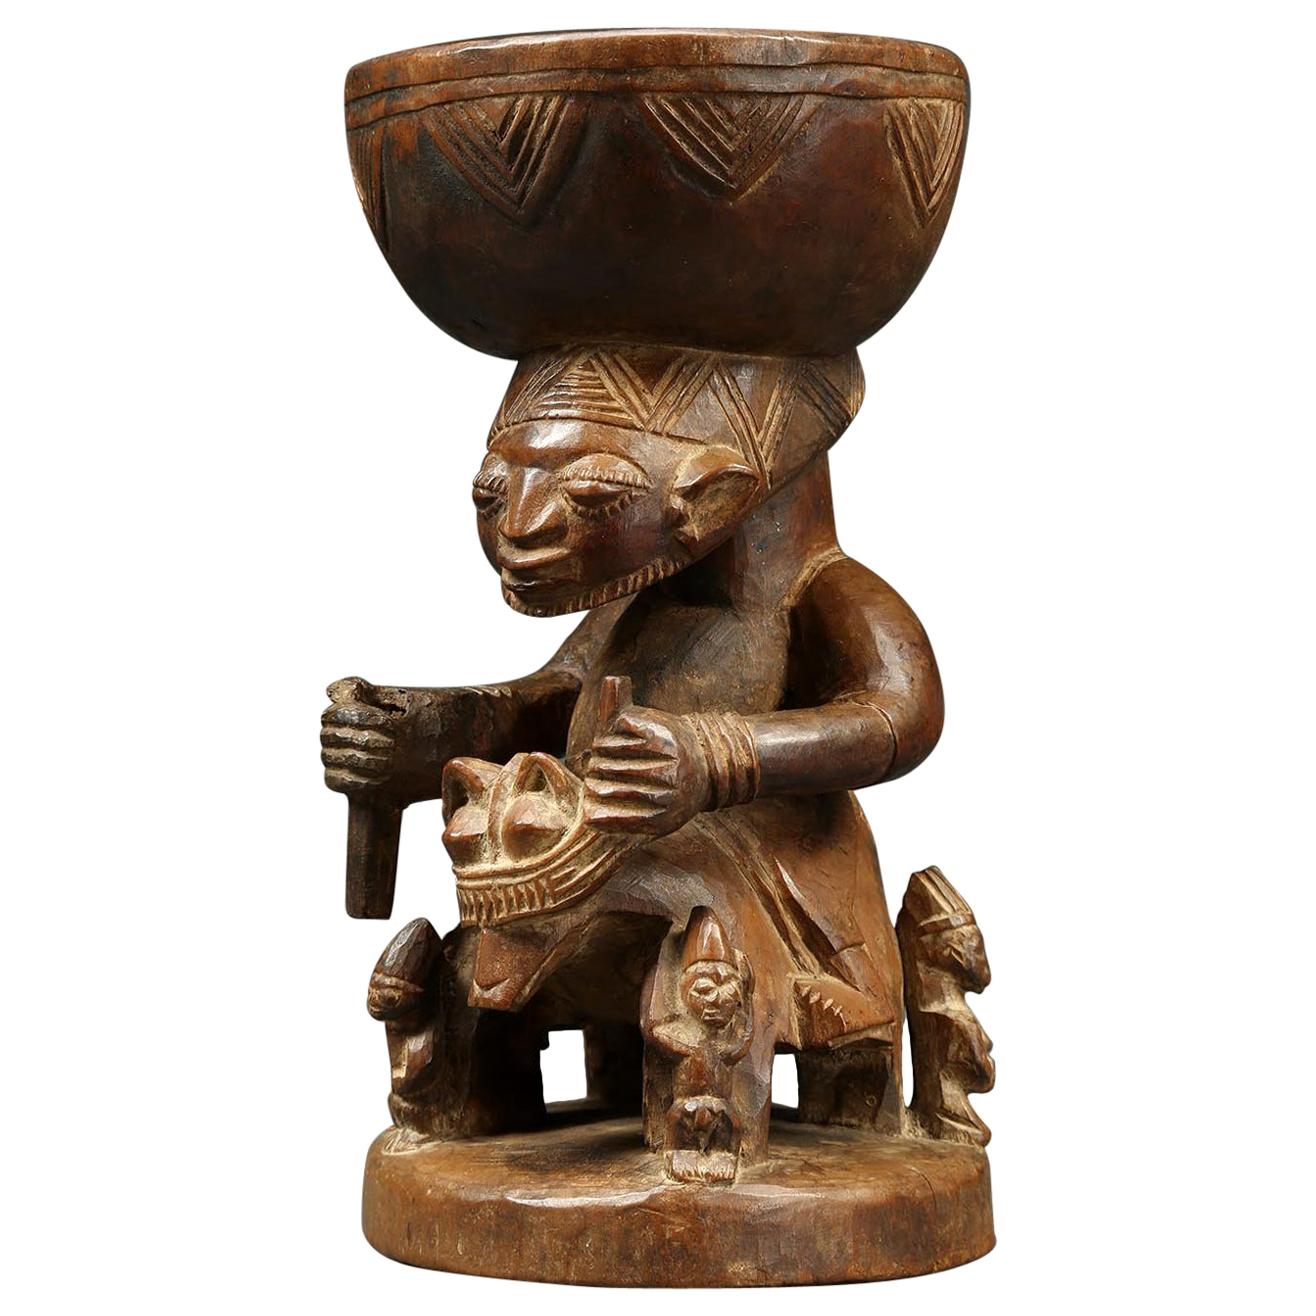 Yoruba Tribal Offering Bowl with Horse and Rider, Nigeria